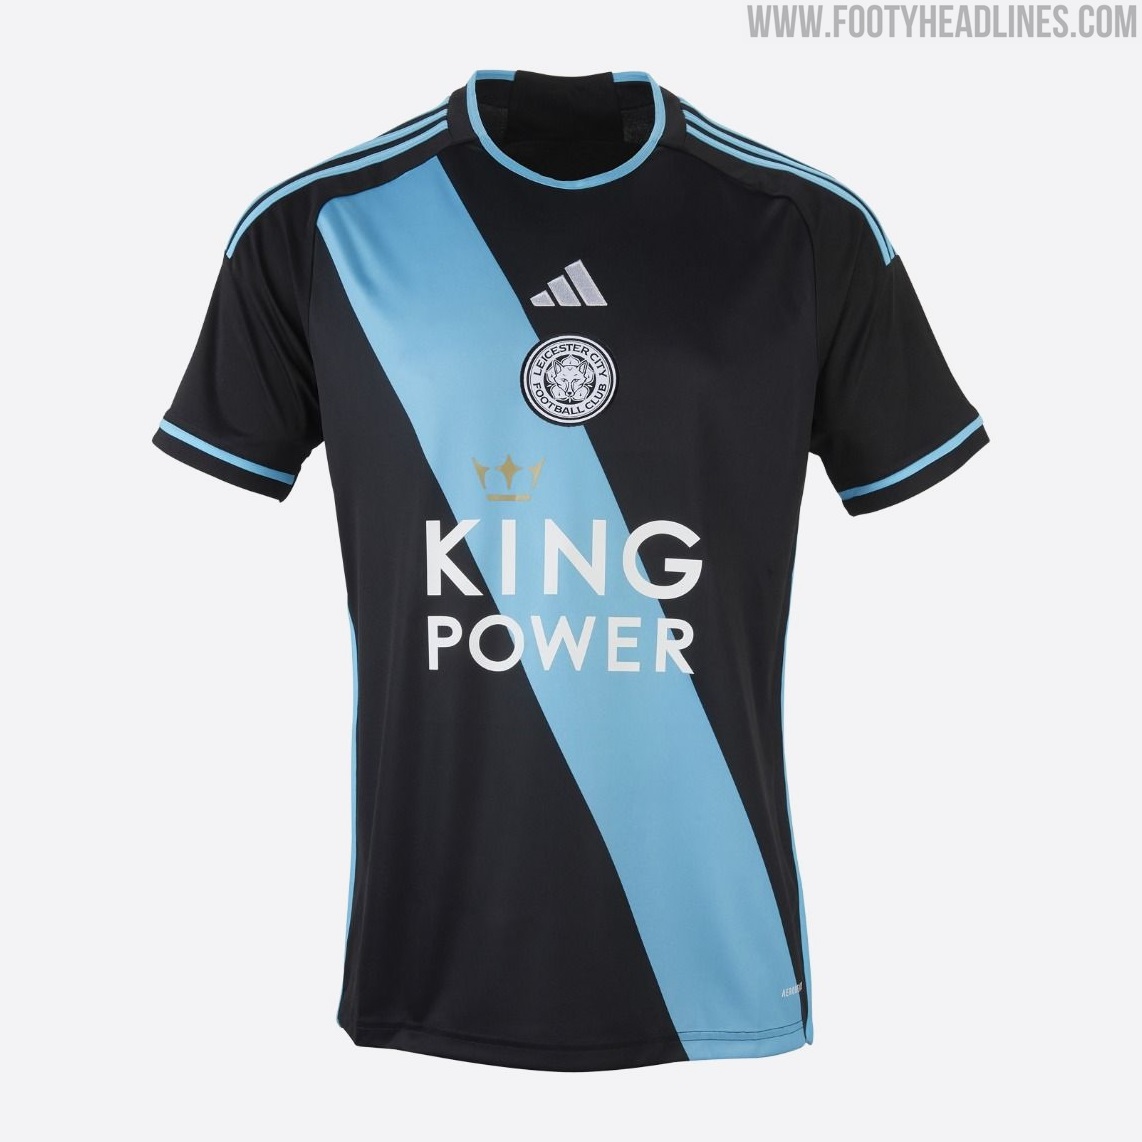 Leicester City 23-24 Away Kit Released - Footy Headlines